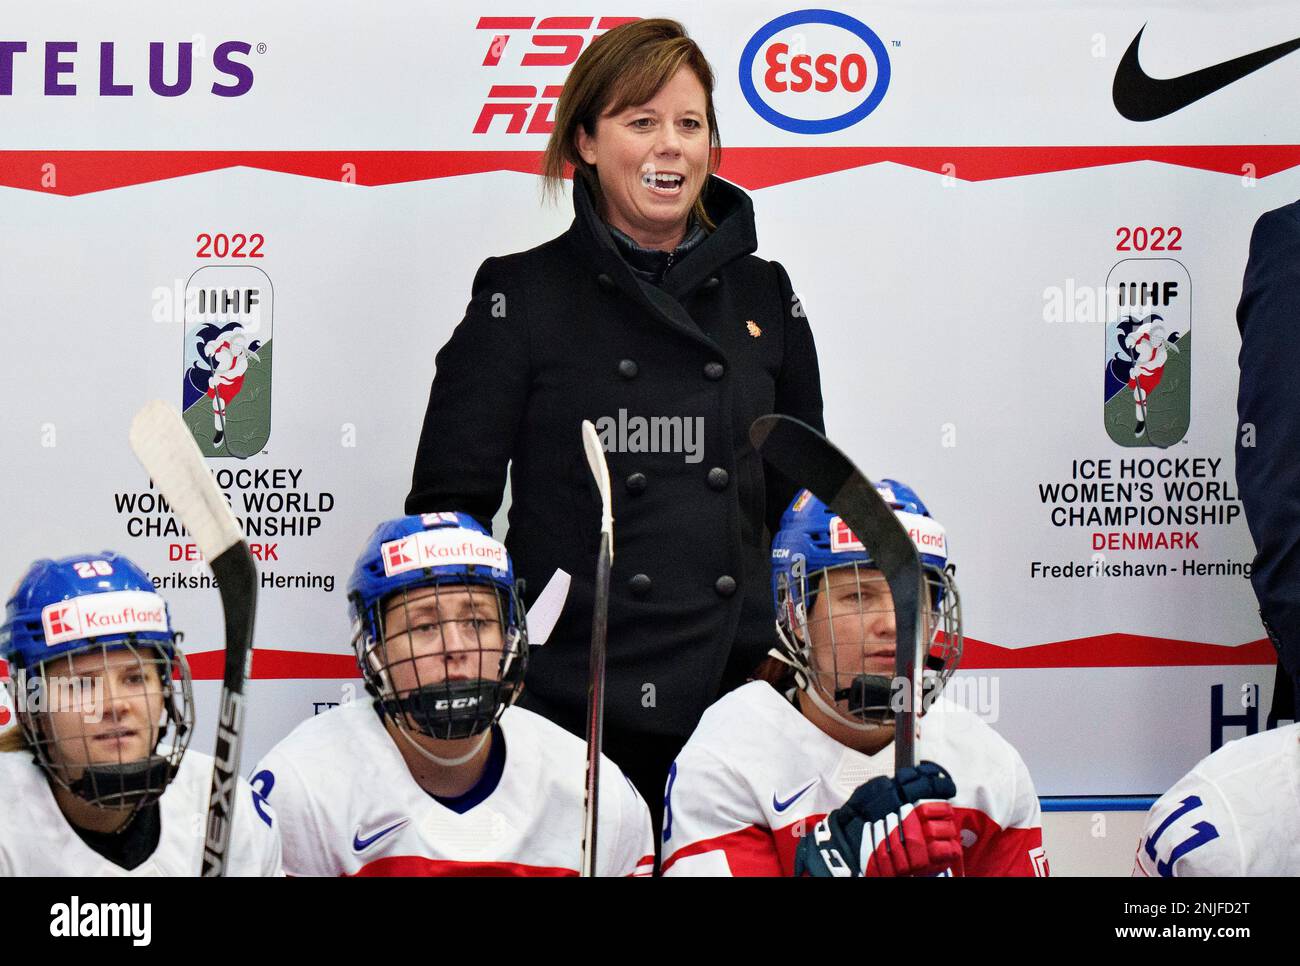 Czech Republic coach Carla Macleod during the IIHF World Championship Womans ice hockey match between Sweden and Czech Republic in Frederikshavn, Denmark, Tuesday, Aug 30, 2022